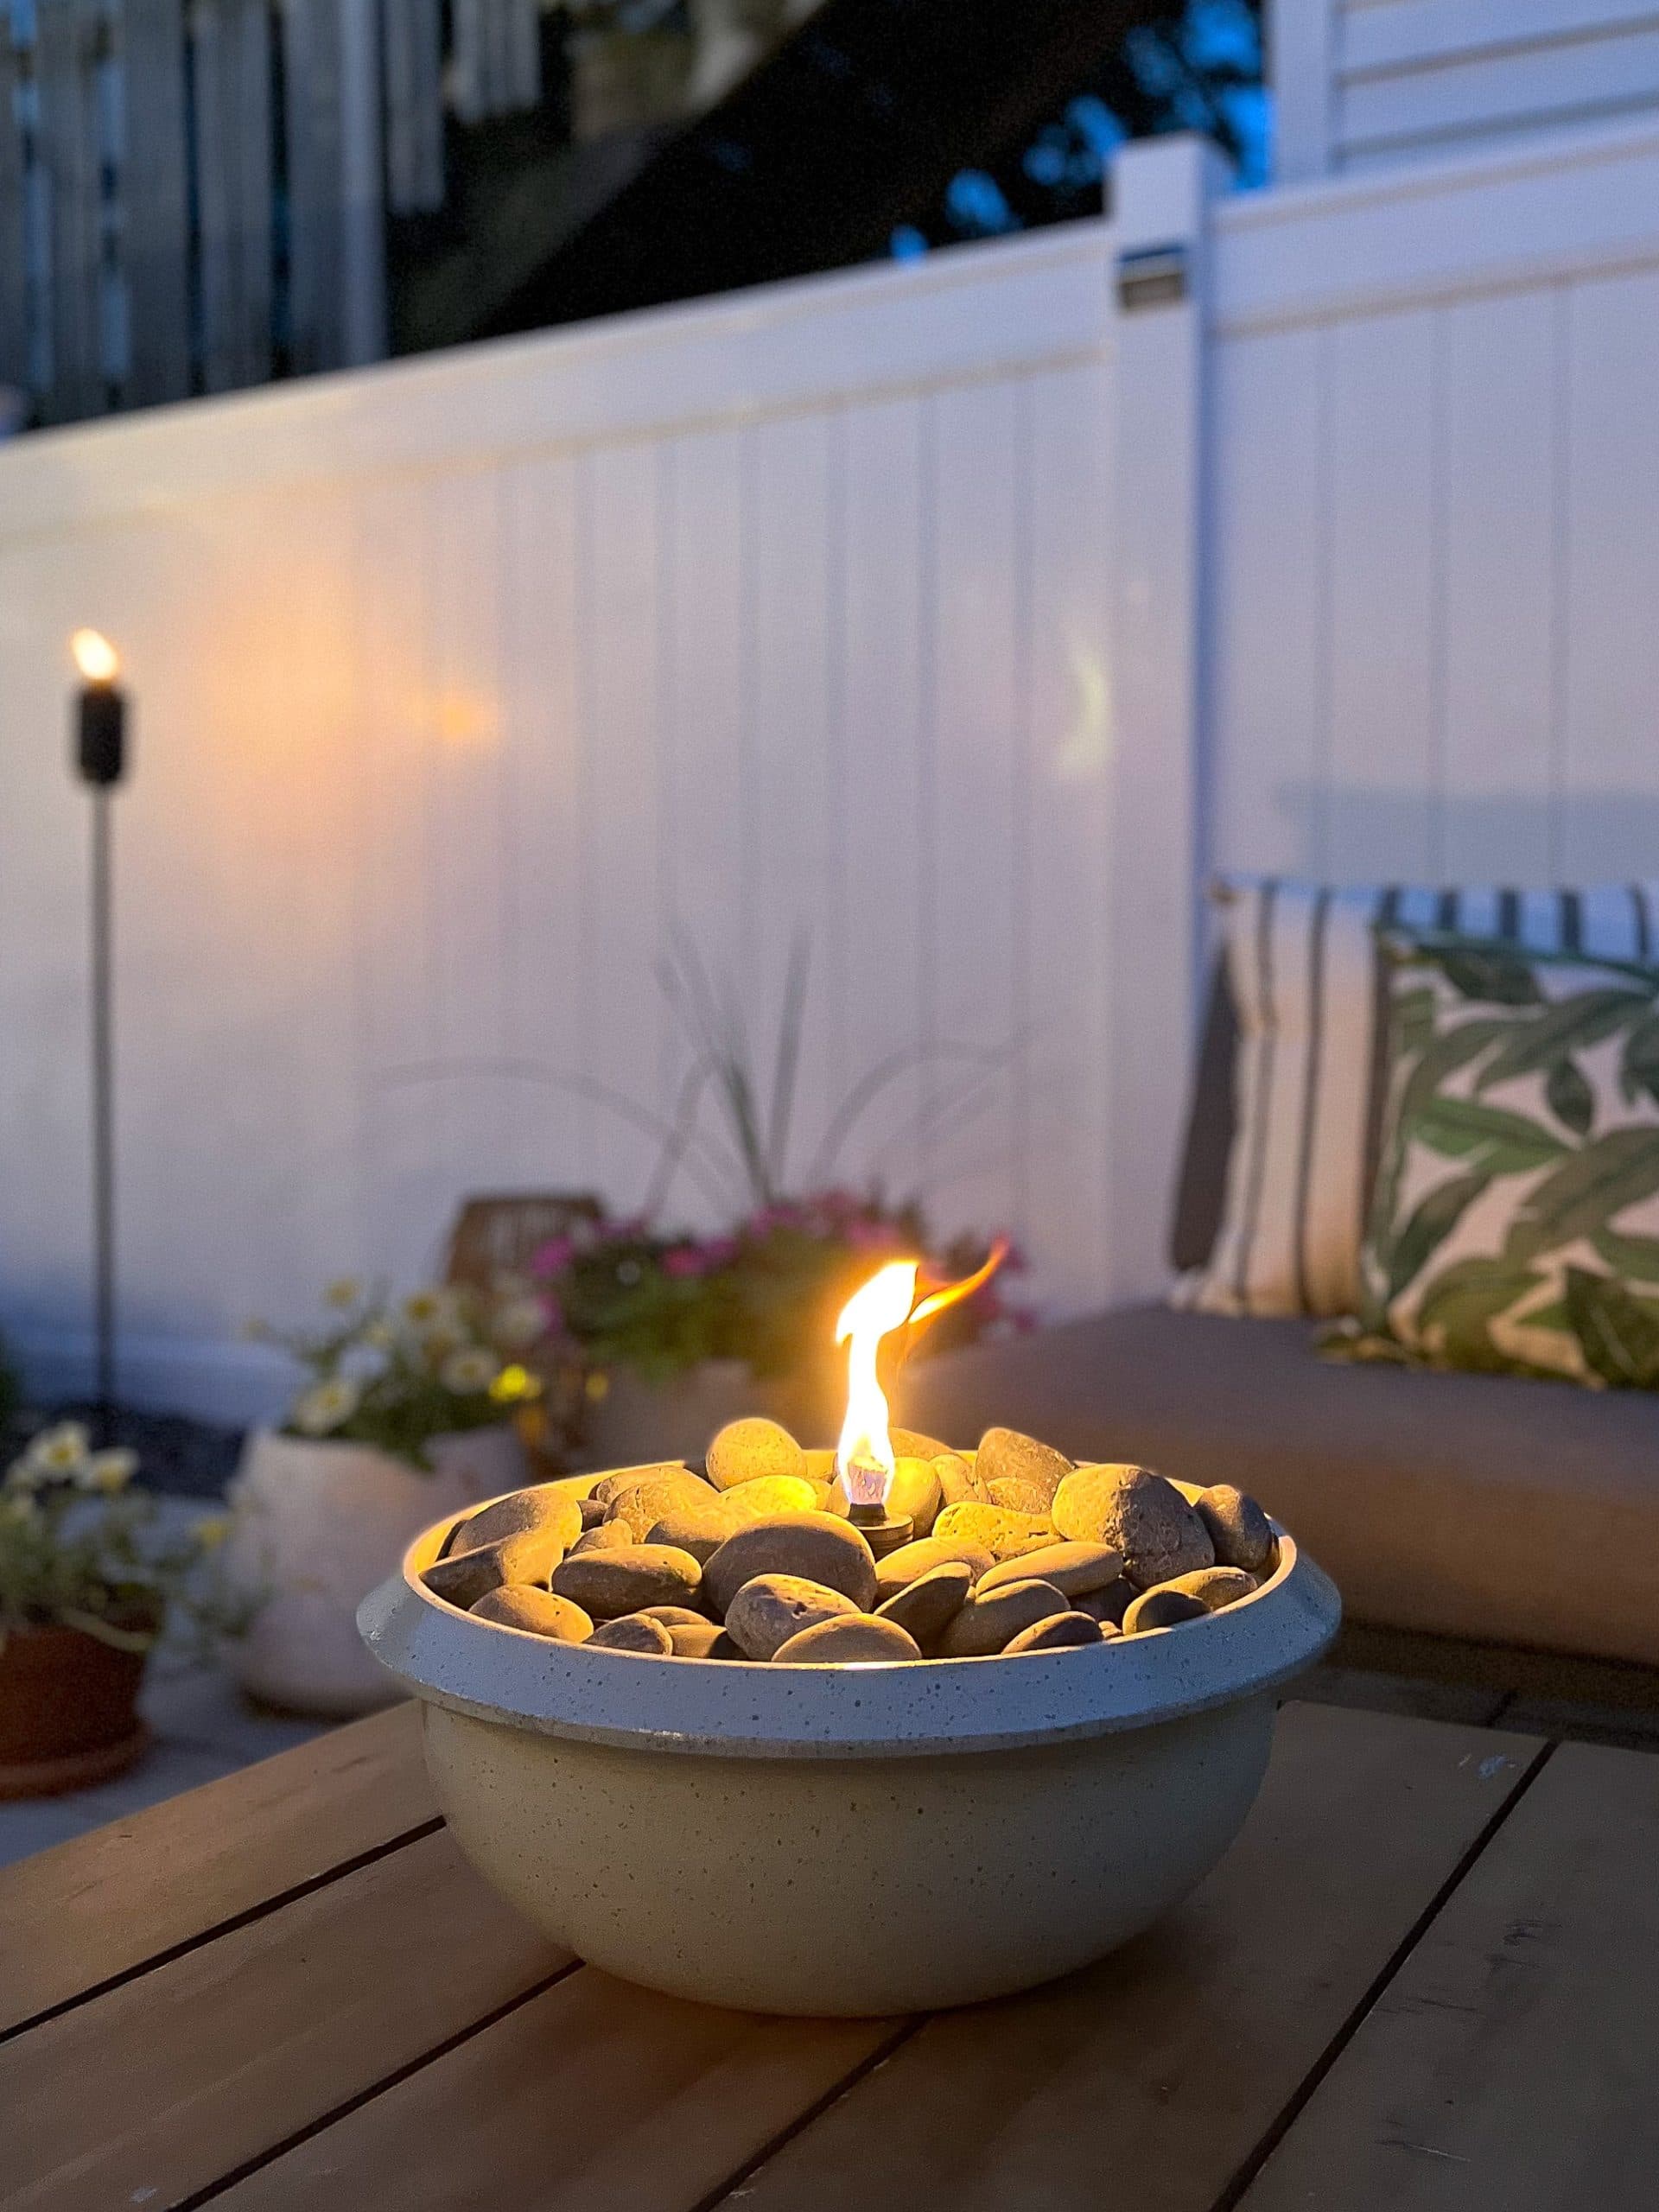 How to Make a DIY Tabletop Fire Pit, DIY Fire Pit Table